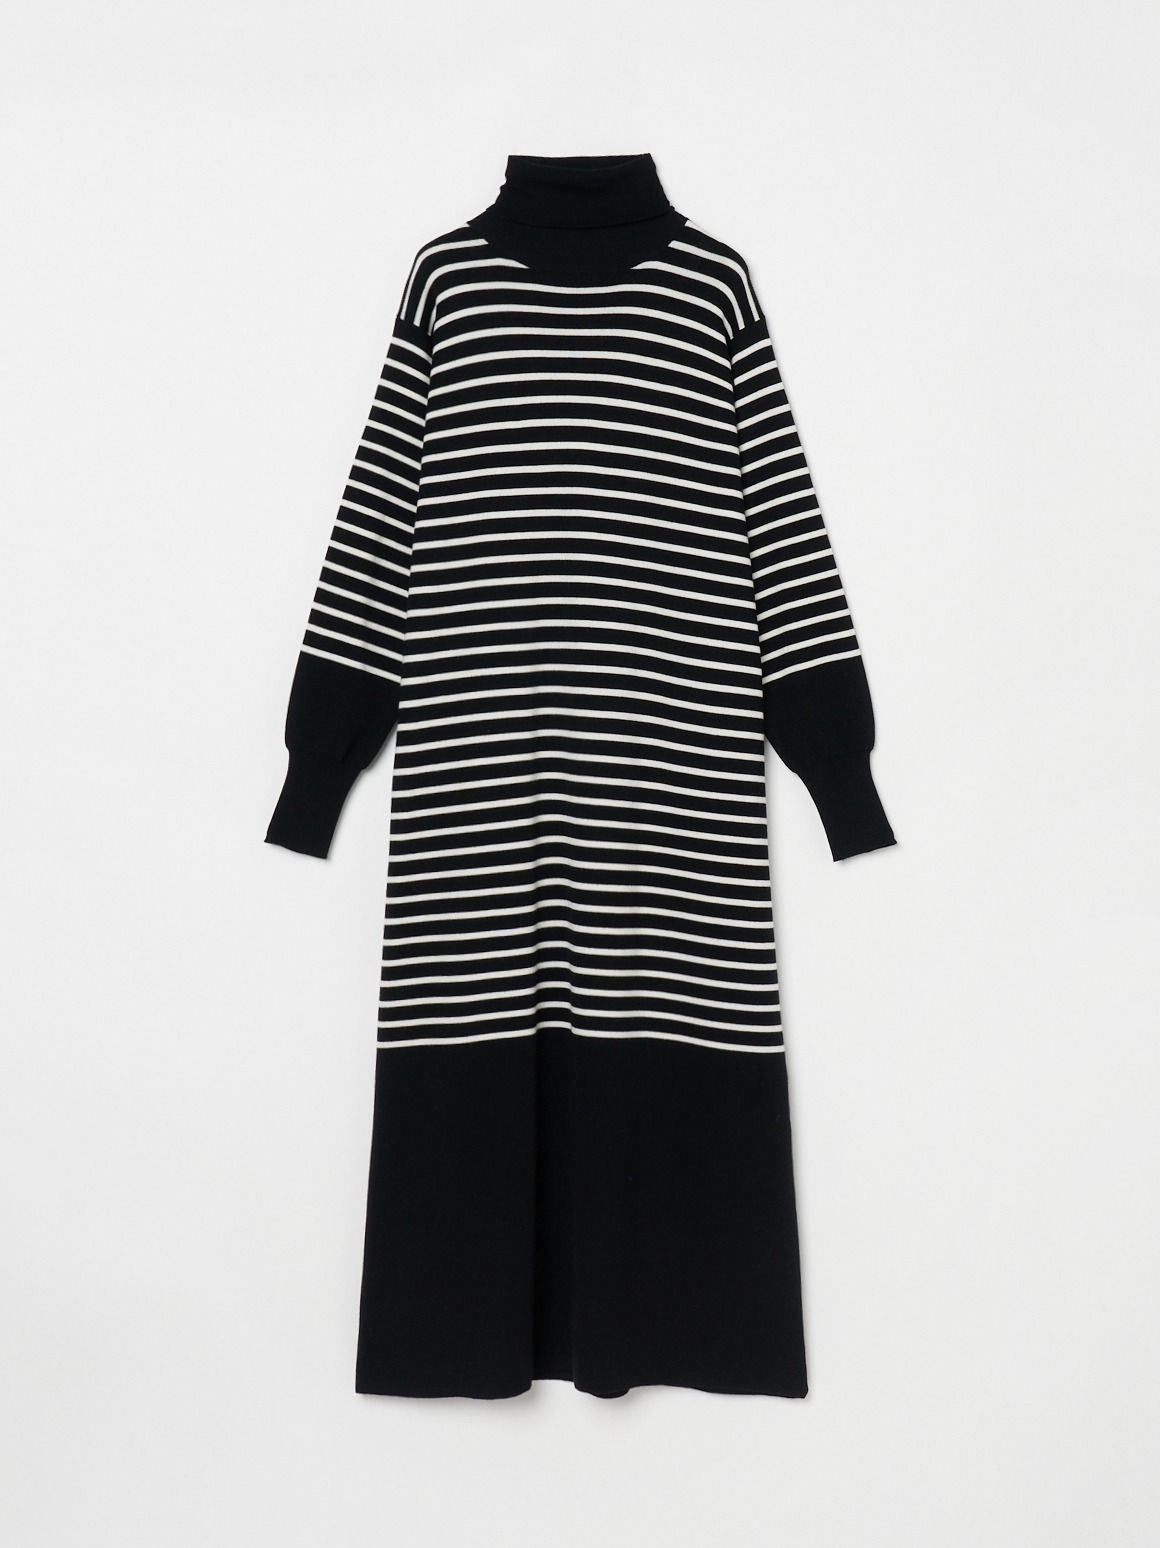 Wool outfit dress 詳細画像 black/off white 1